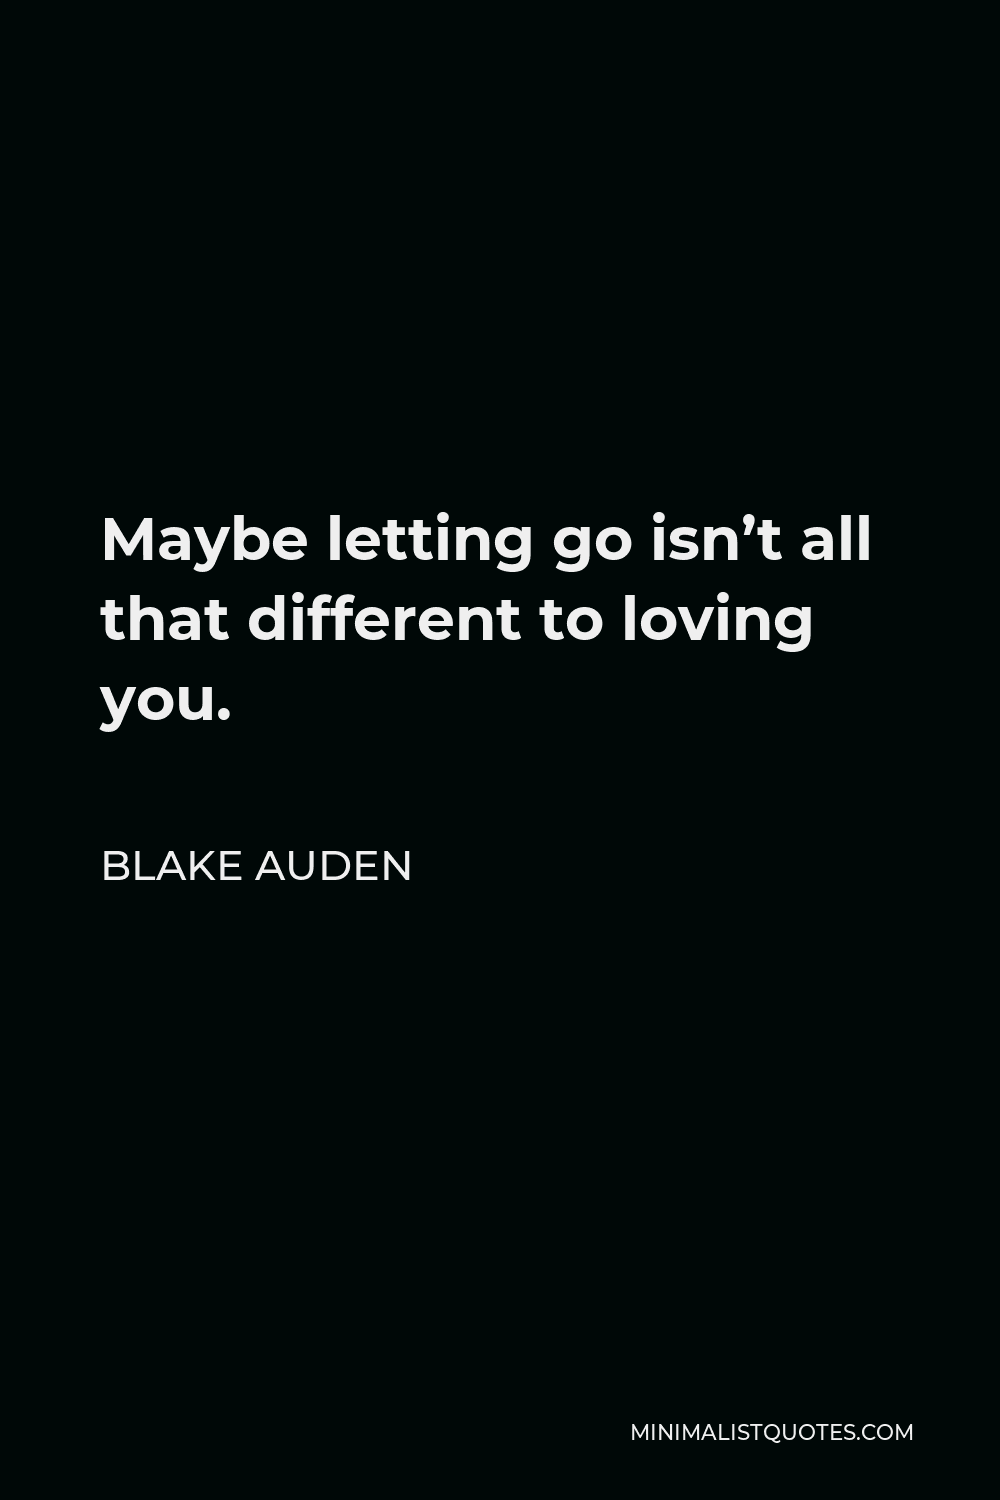 Blake Auden Quote - Maybe letting go isn’t all that different to loving you.